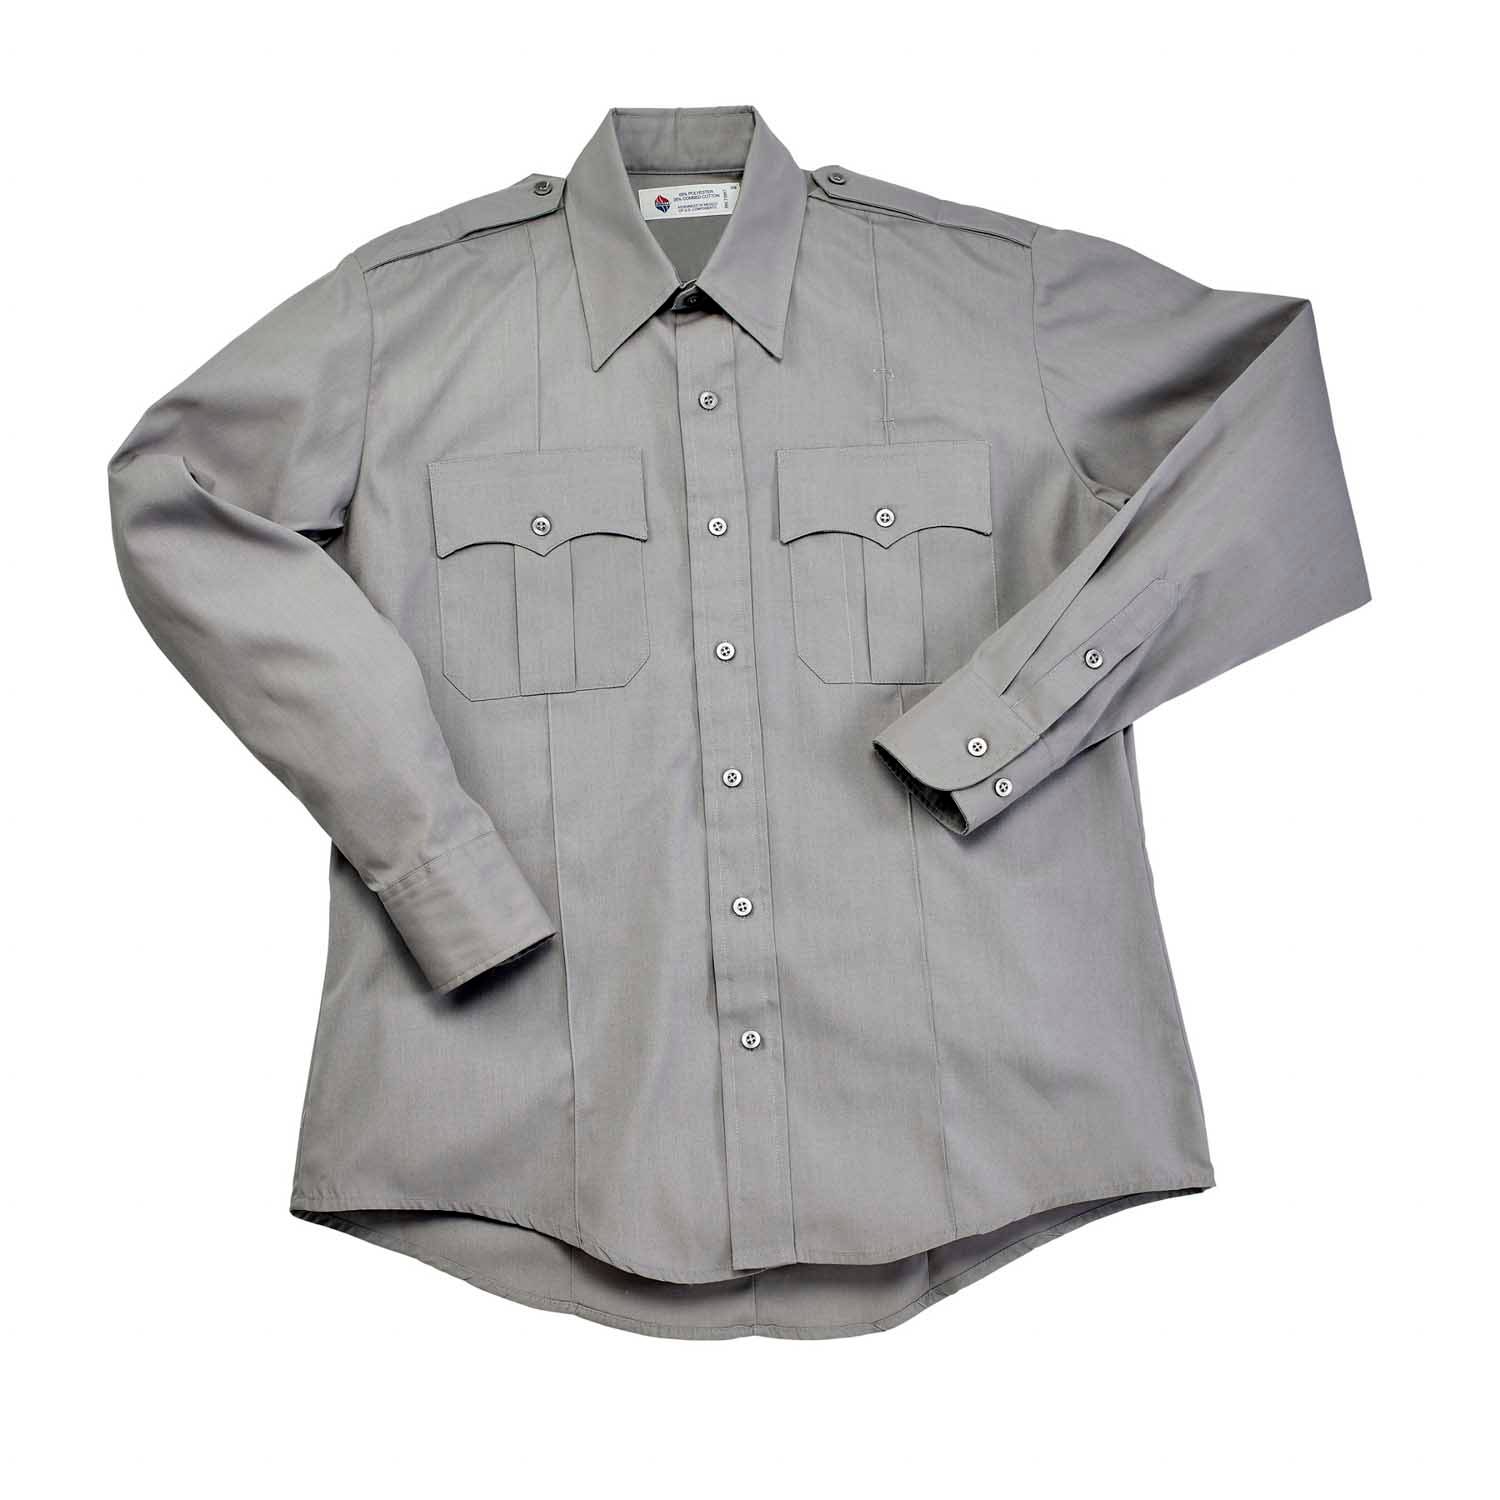 LIBERTY UNIFORM POLYESTER AND COTTON POLICE SHIRTS